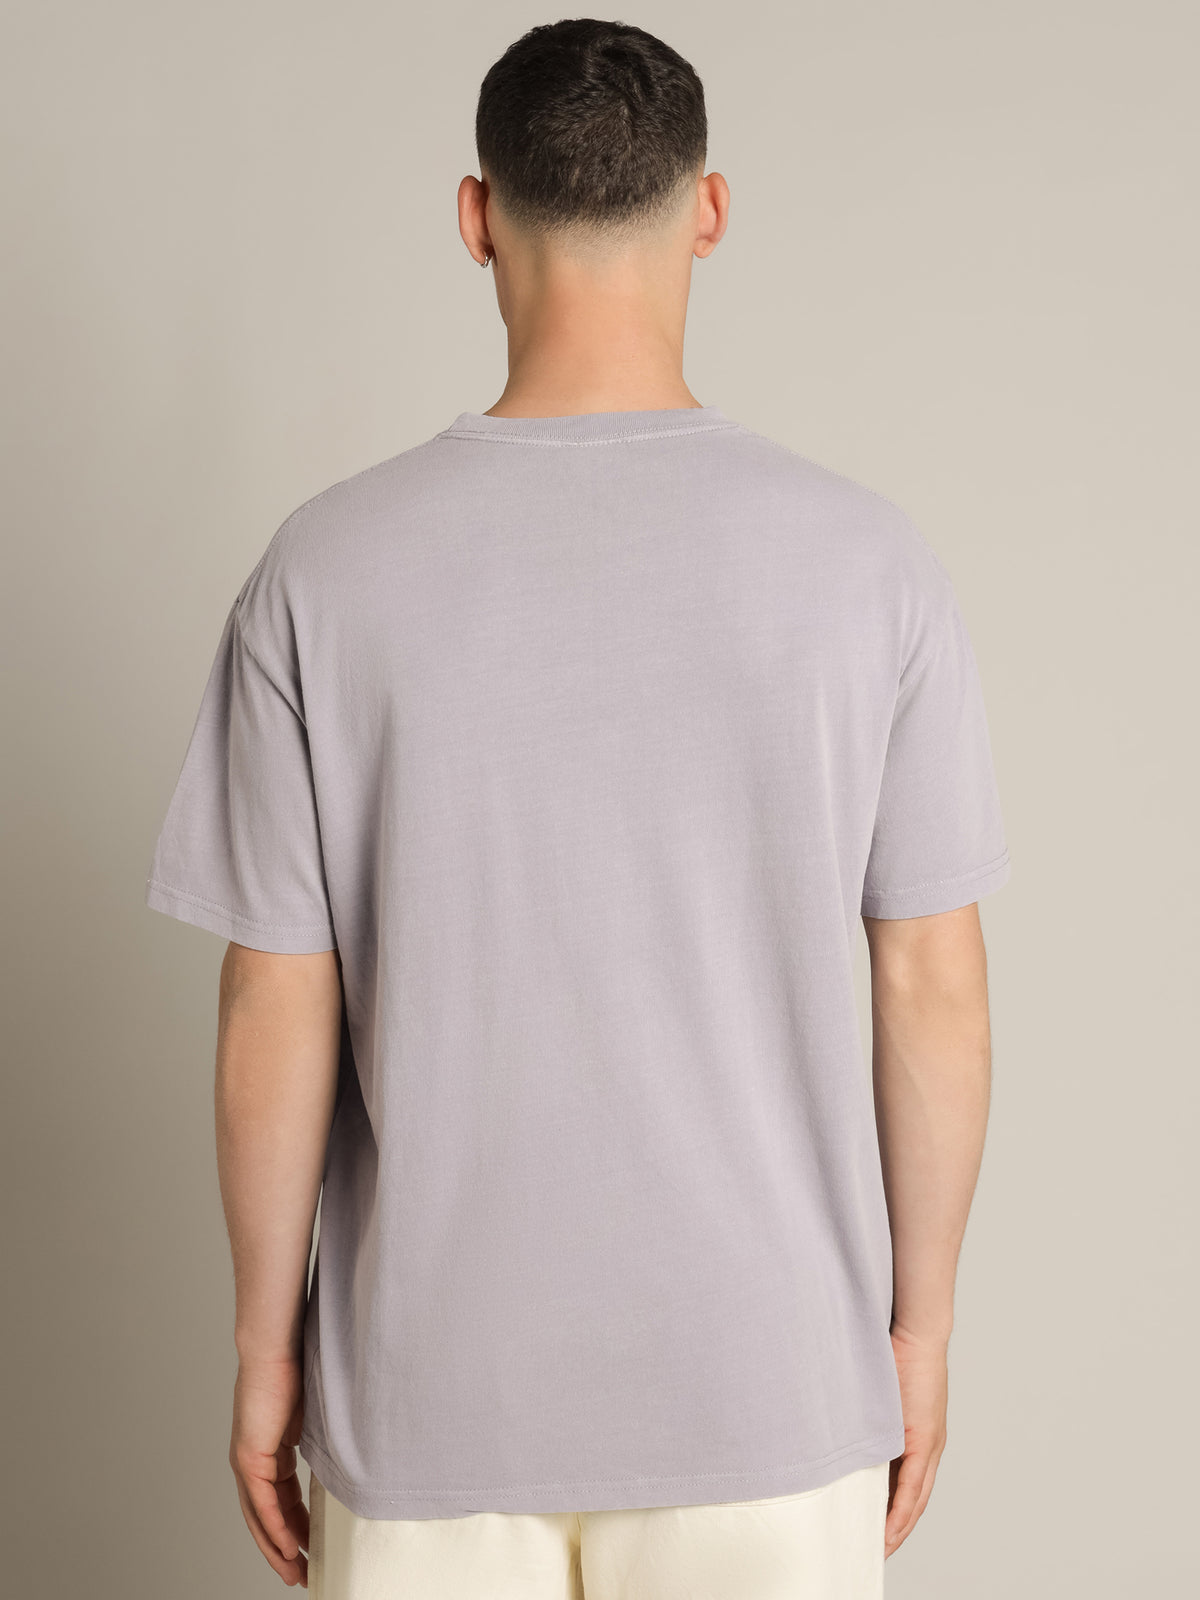 Shadow Stock T-Shirt in Mauve